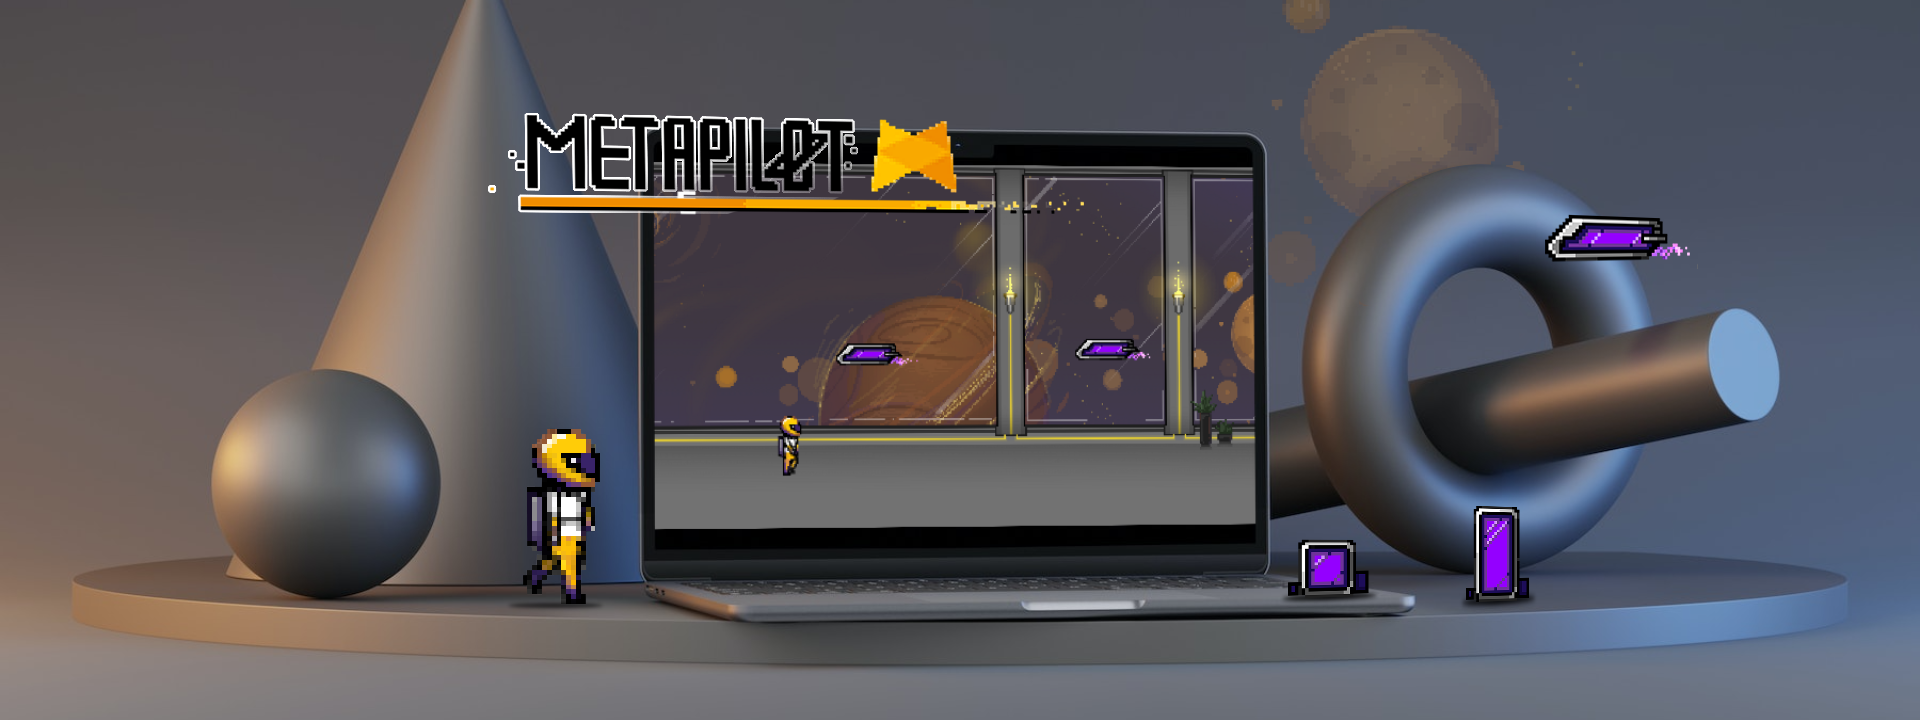 Metapilot's Jump'n'Run mini-game for interaction and gamification